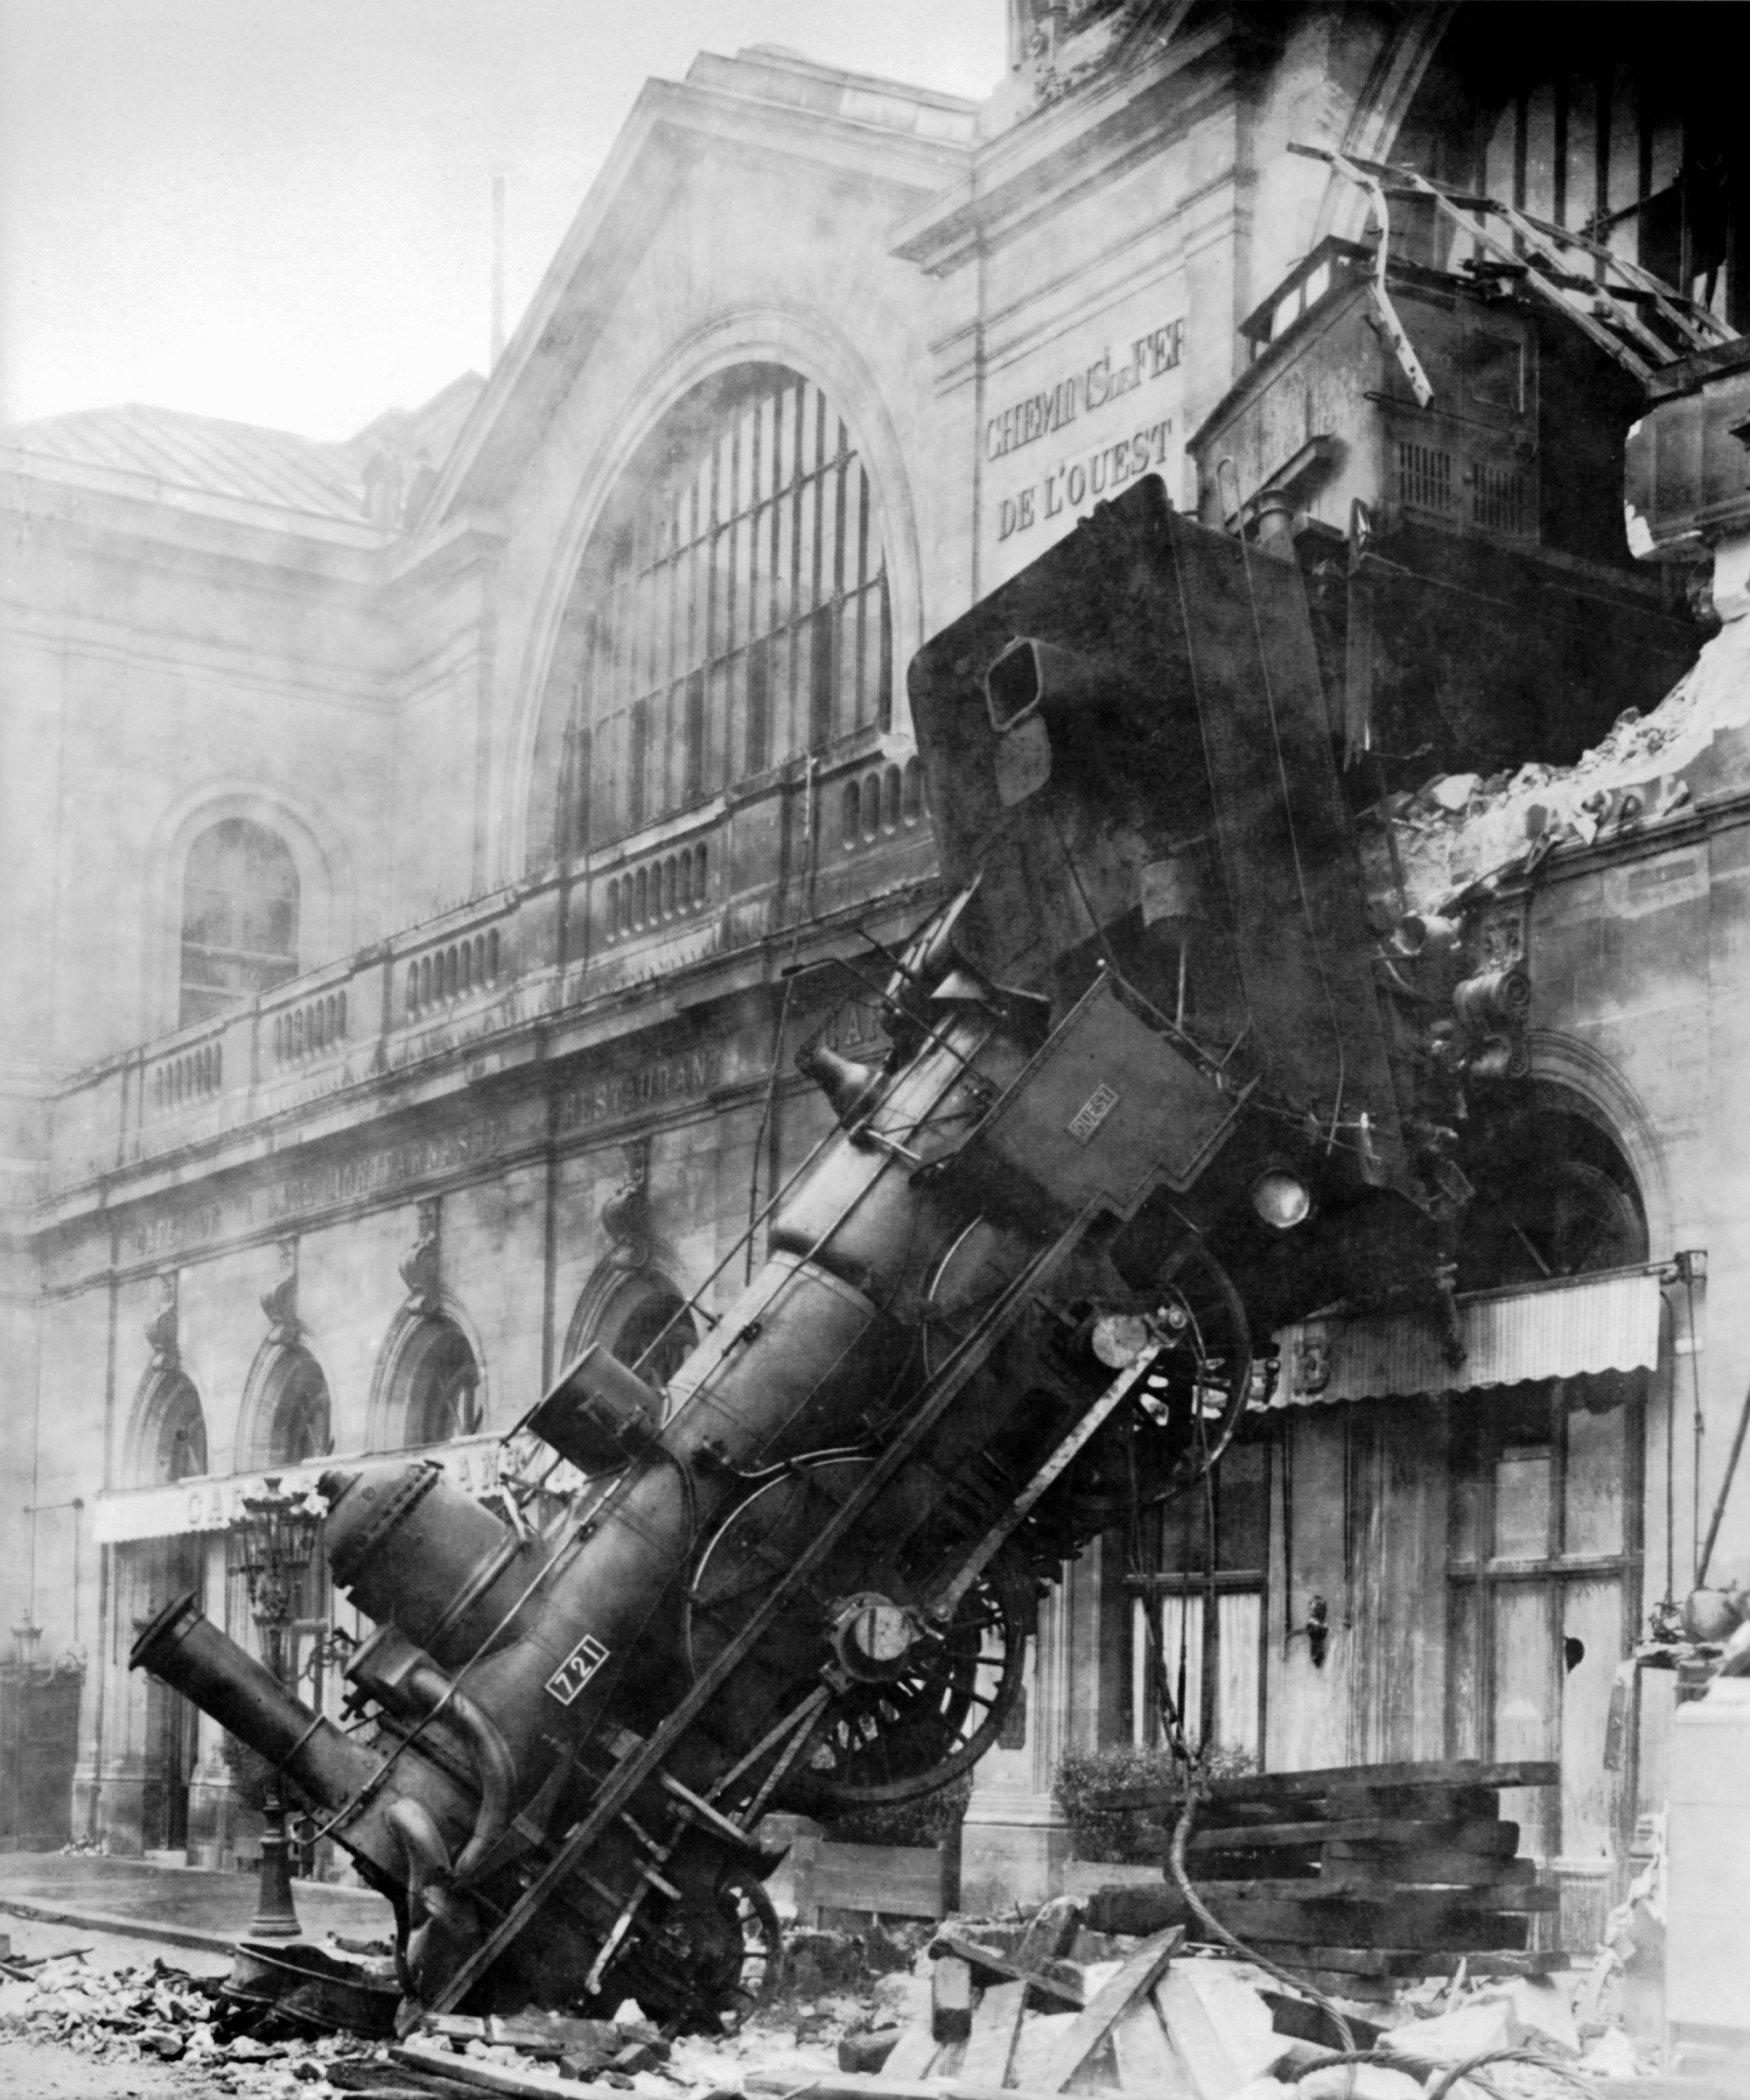 Black and white image of a runaway train that crashed into a building in Montparnasse